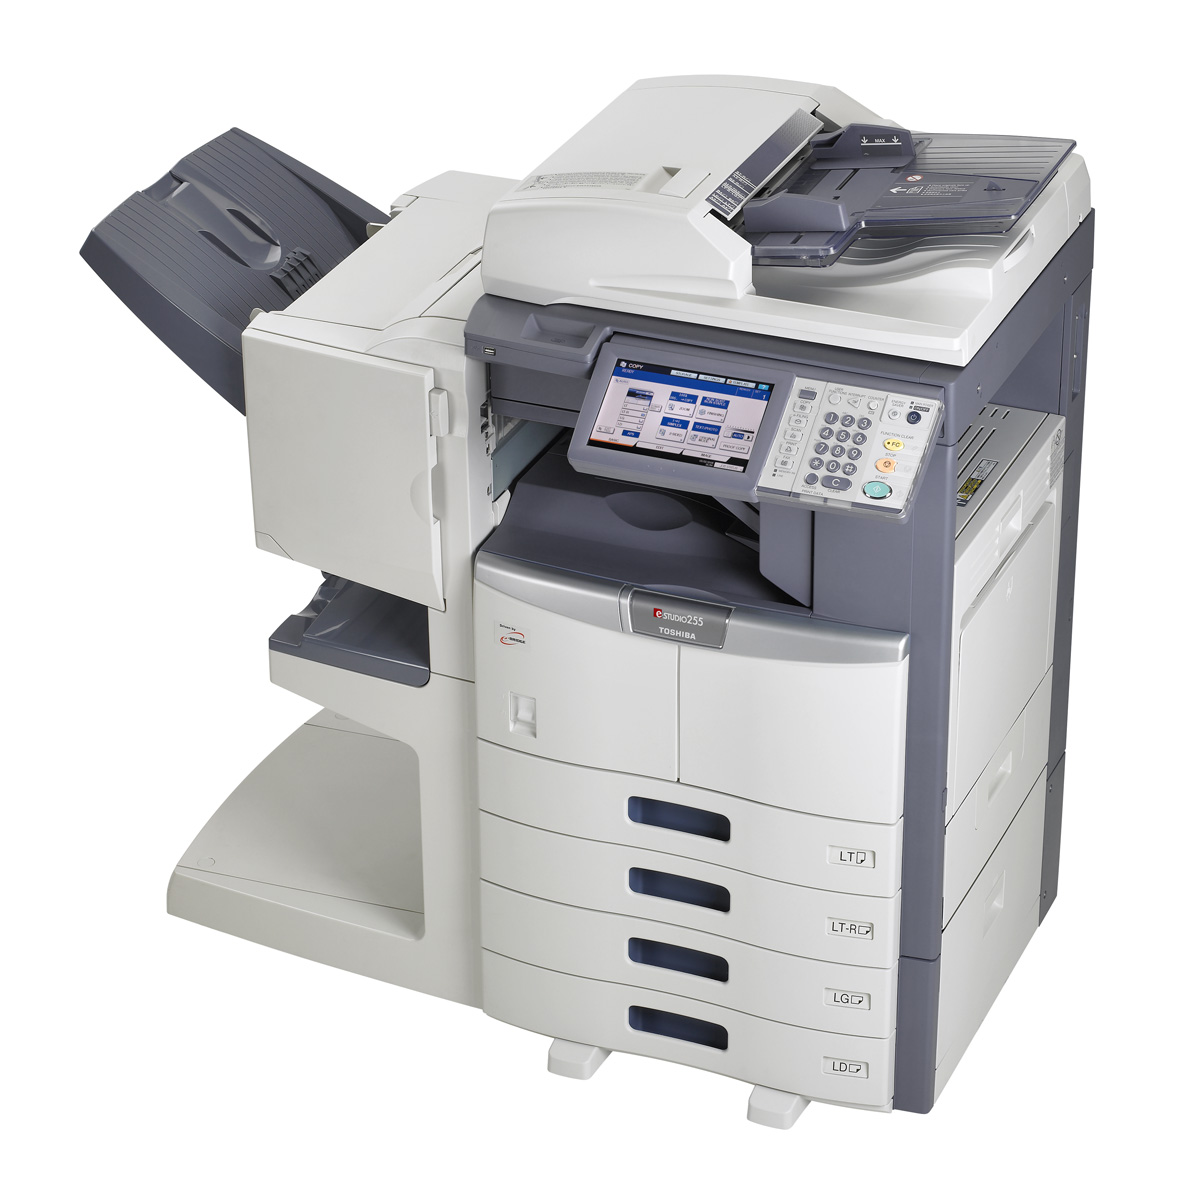 Toshiba E-STUDIO 306 (Meter and prices depending on availability) Off Lease Printer